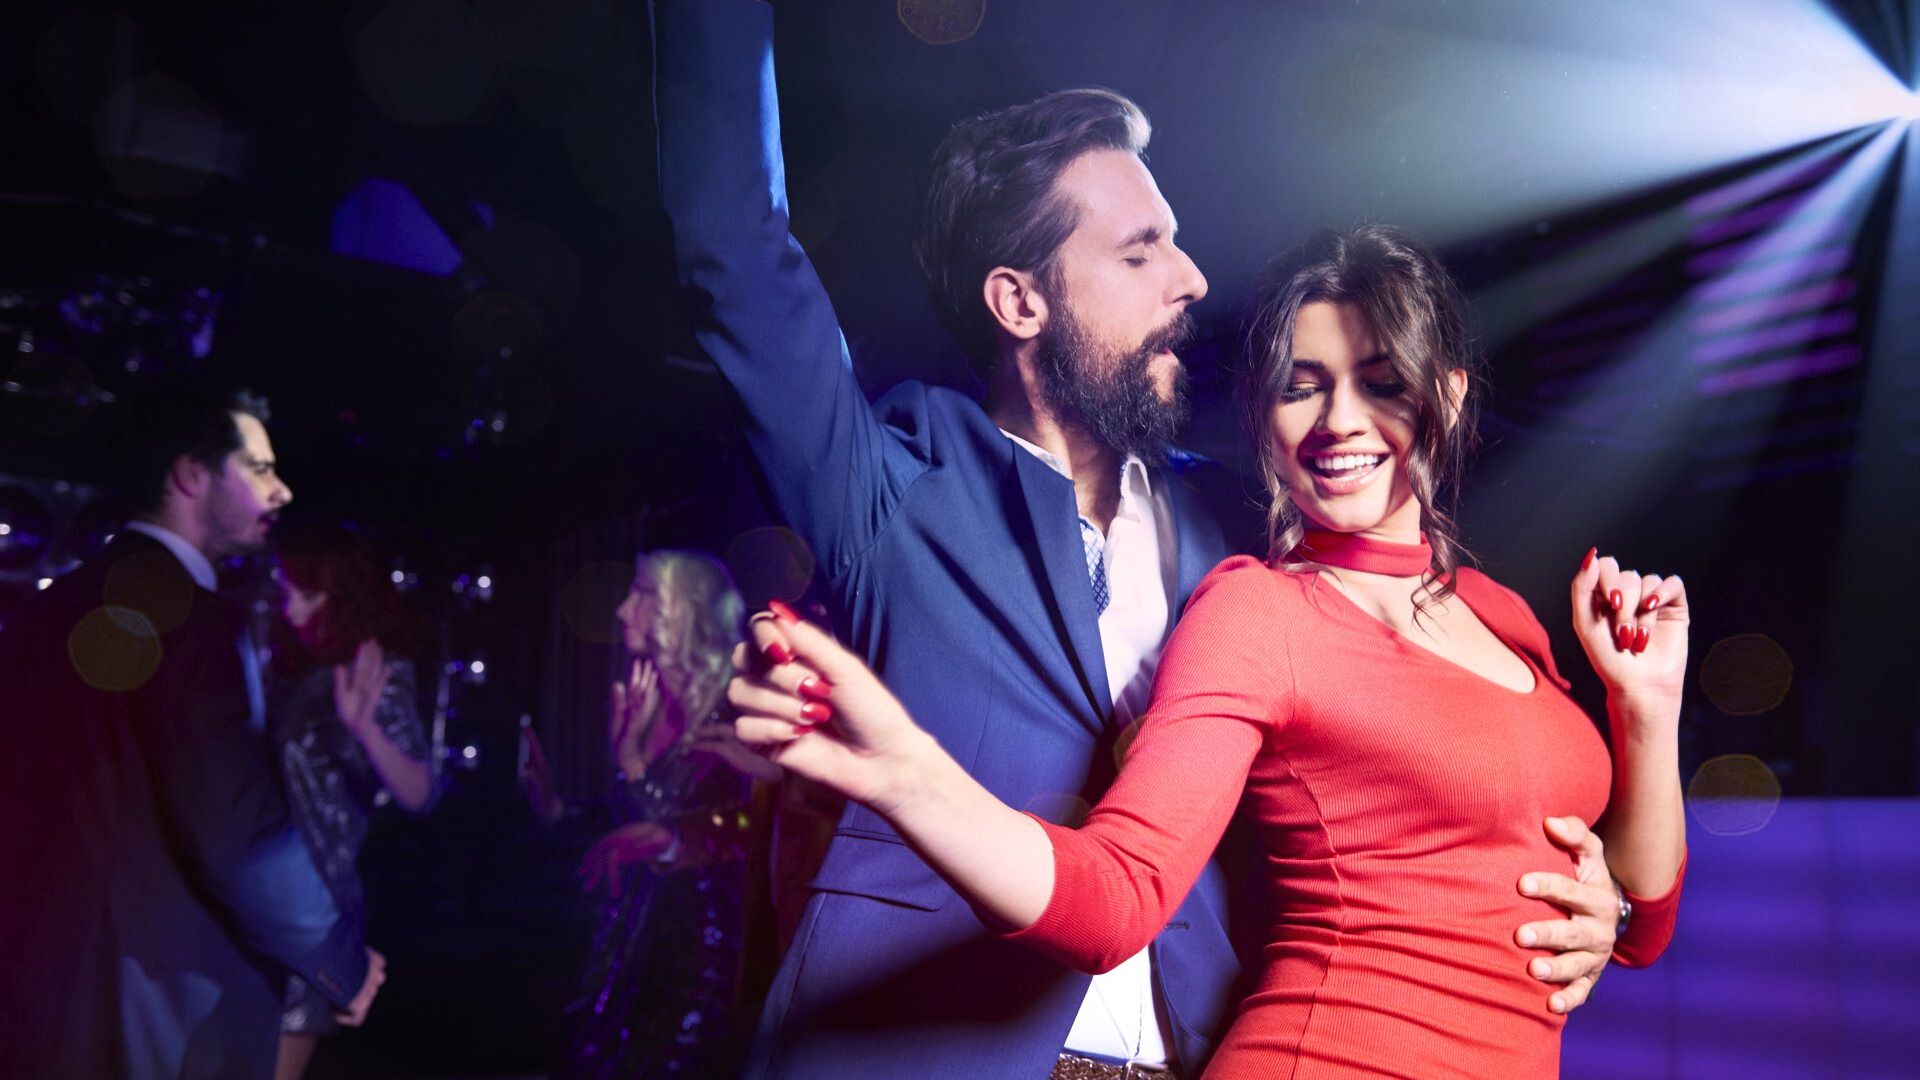 A man in suite dancing with a woman in red dress at a party in a night club